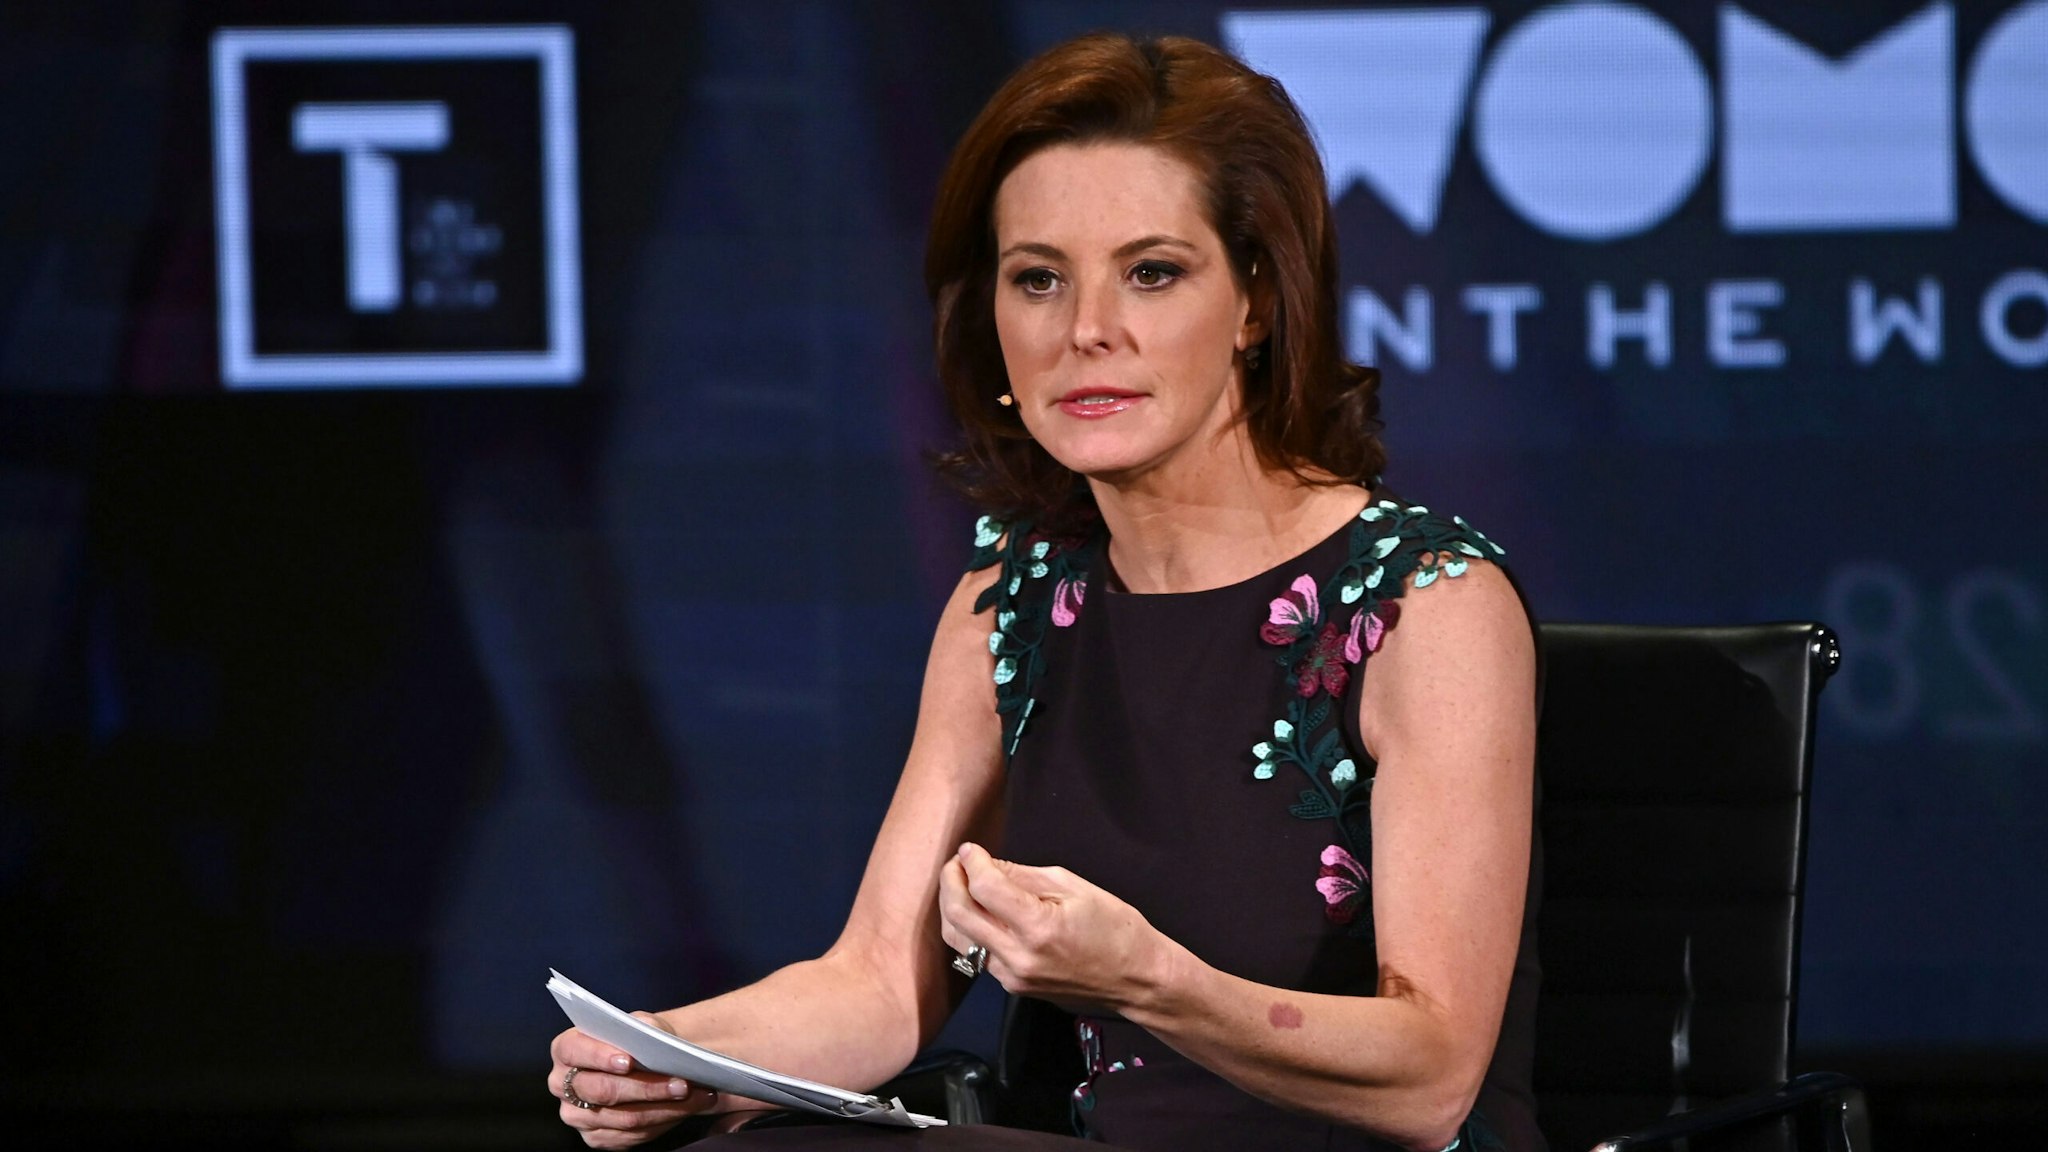 NEW YORK, NEW YORK - APRIL 11: Stephanie Ruhle speaks onstage at the 10th Anniversary Women In The World Summit - Day 2 at David H. Koch Theater at Lincoln Center on April 11, 2019 in New York City.